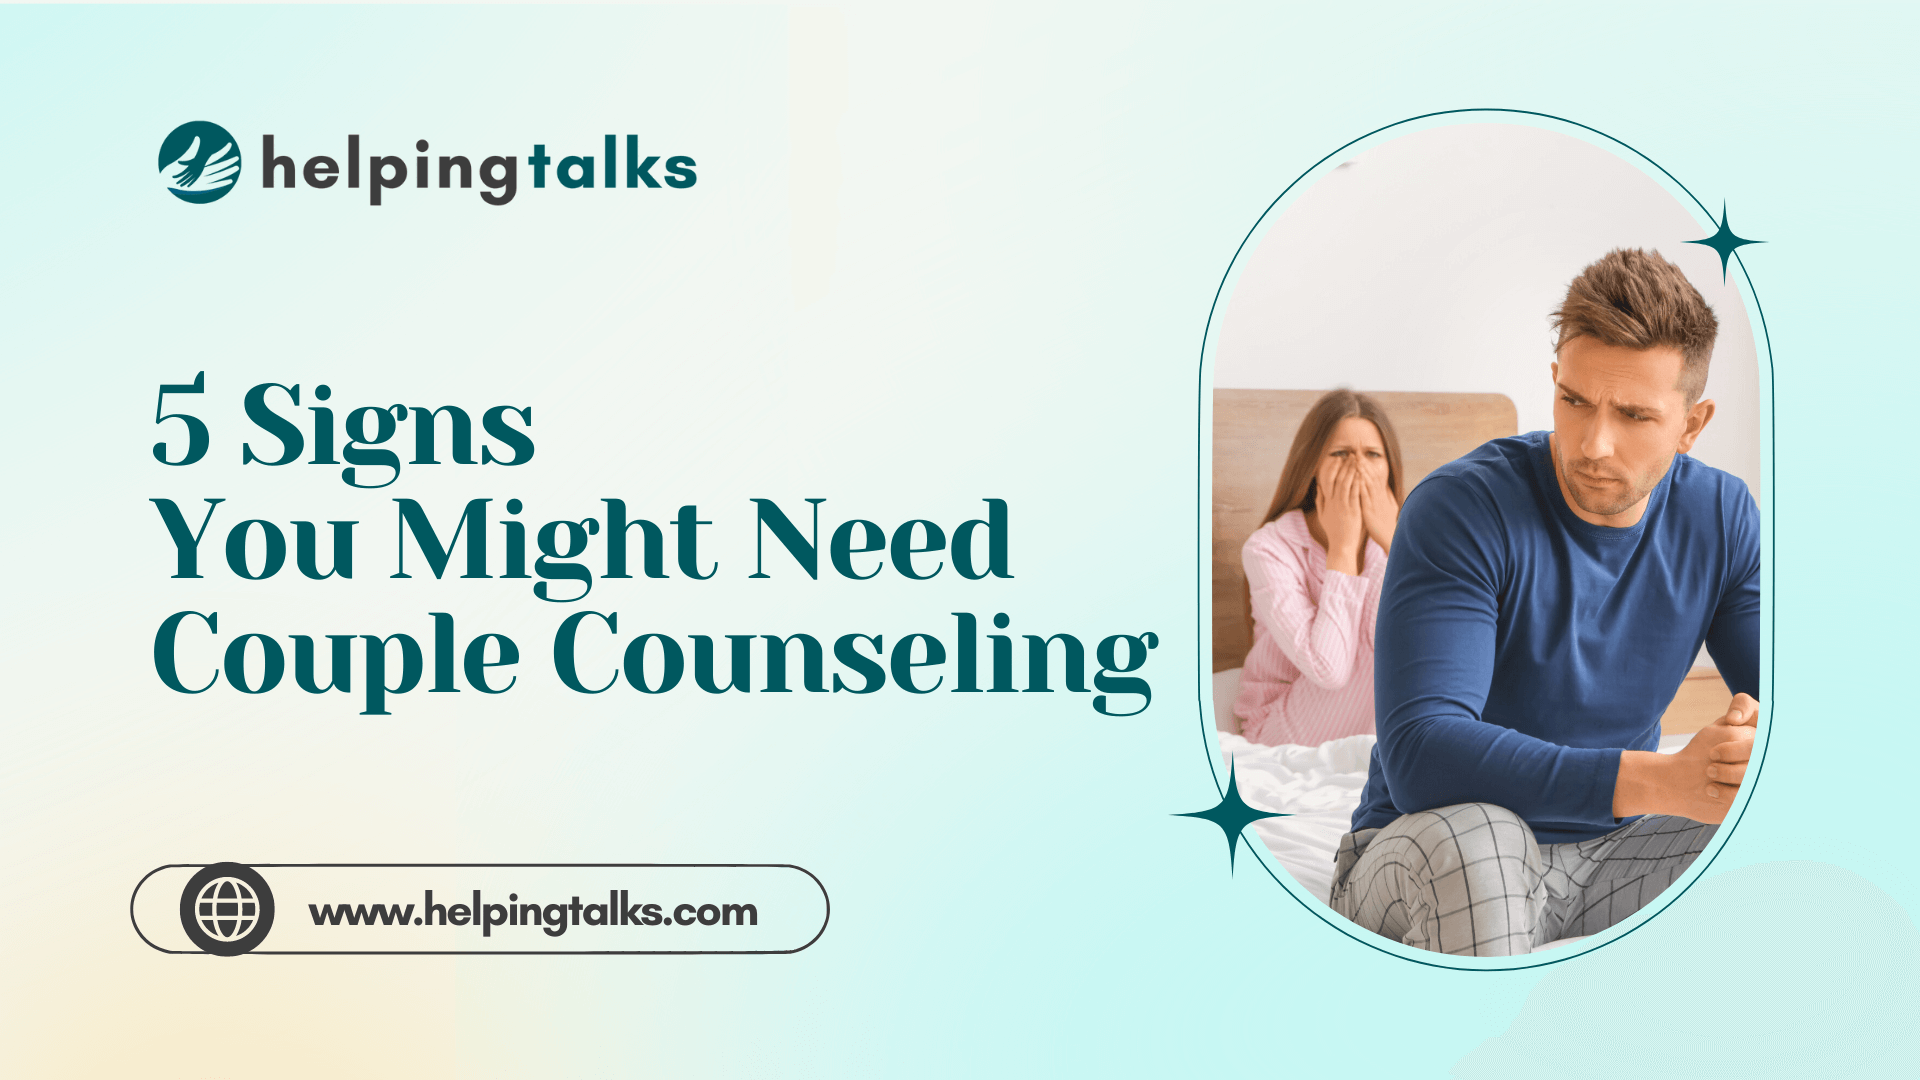 5 Signs You Might Need Couple Counseling